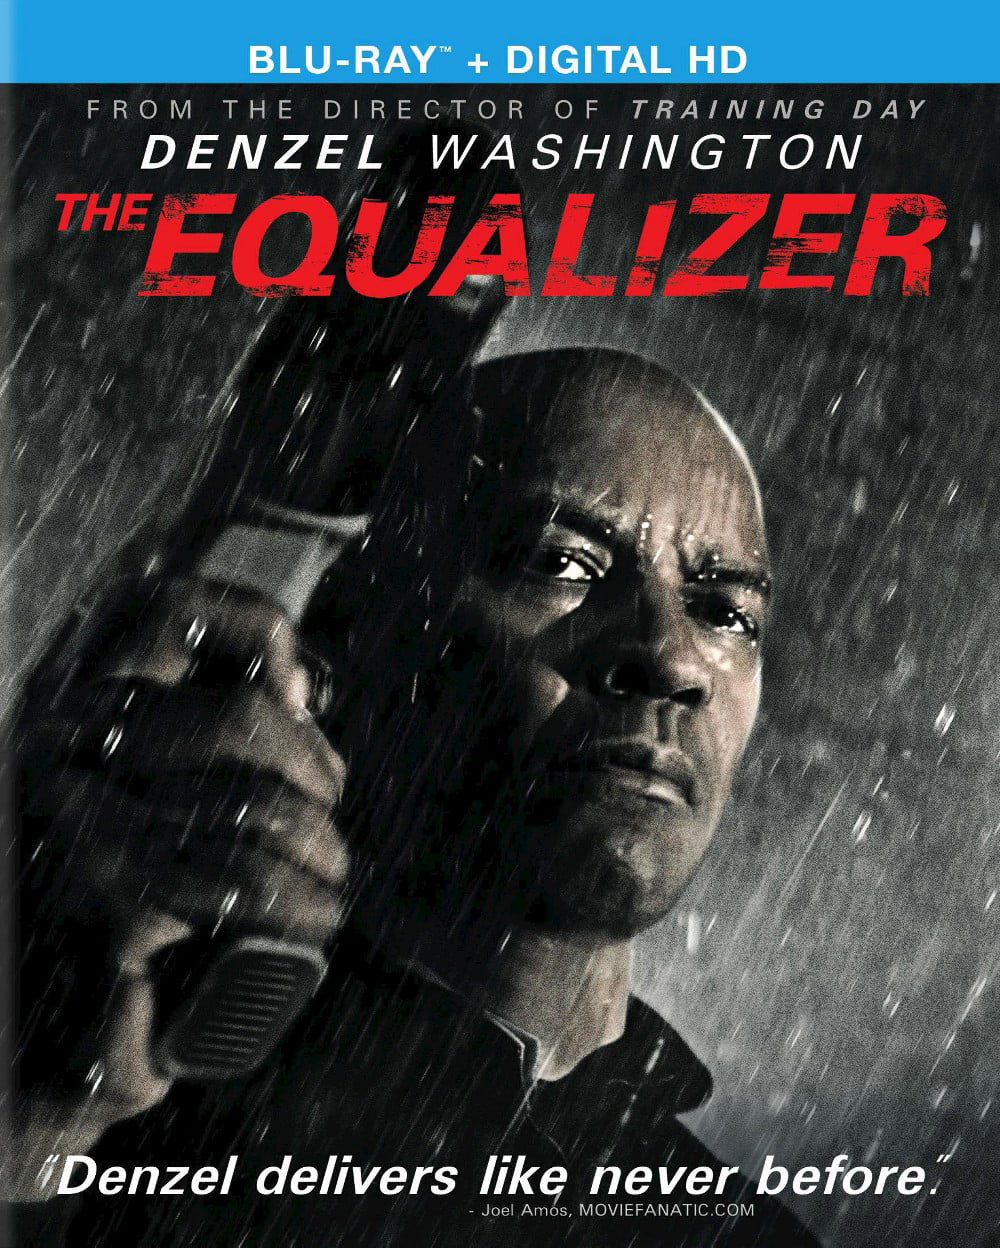 The Equalizer 2-Movie Collection (DVD + Digital Copy) (Walmart